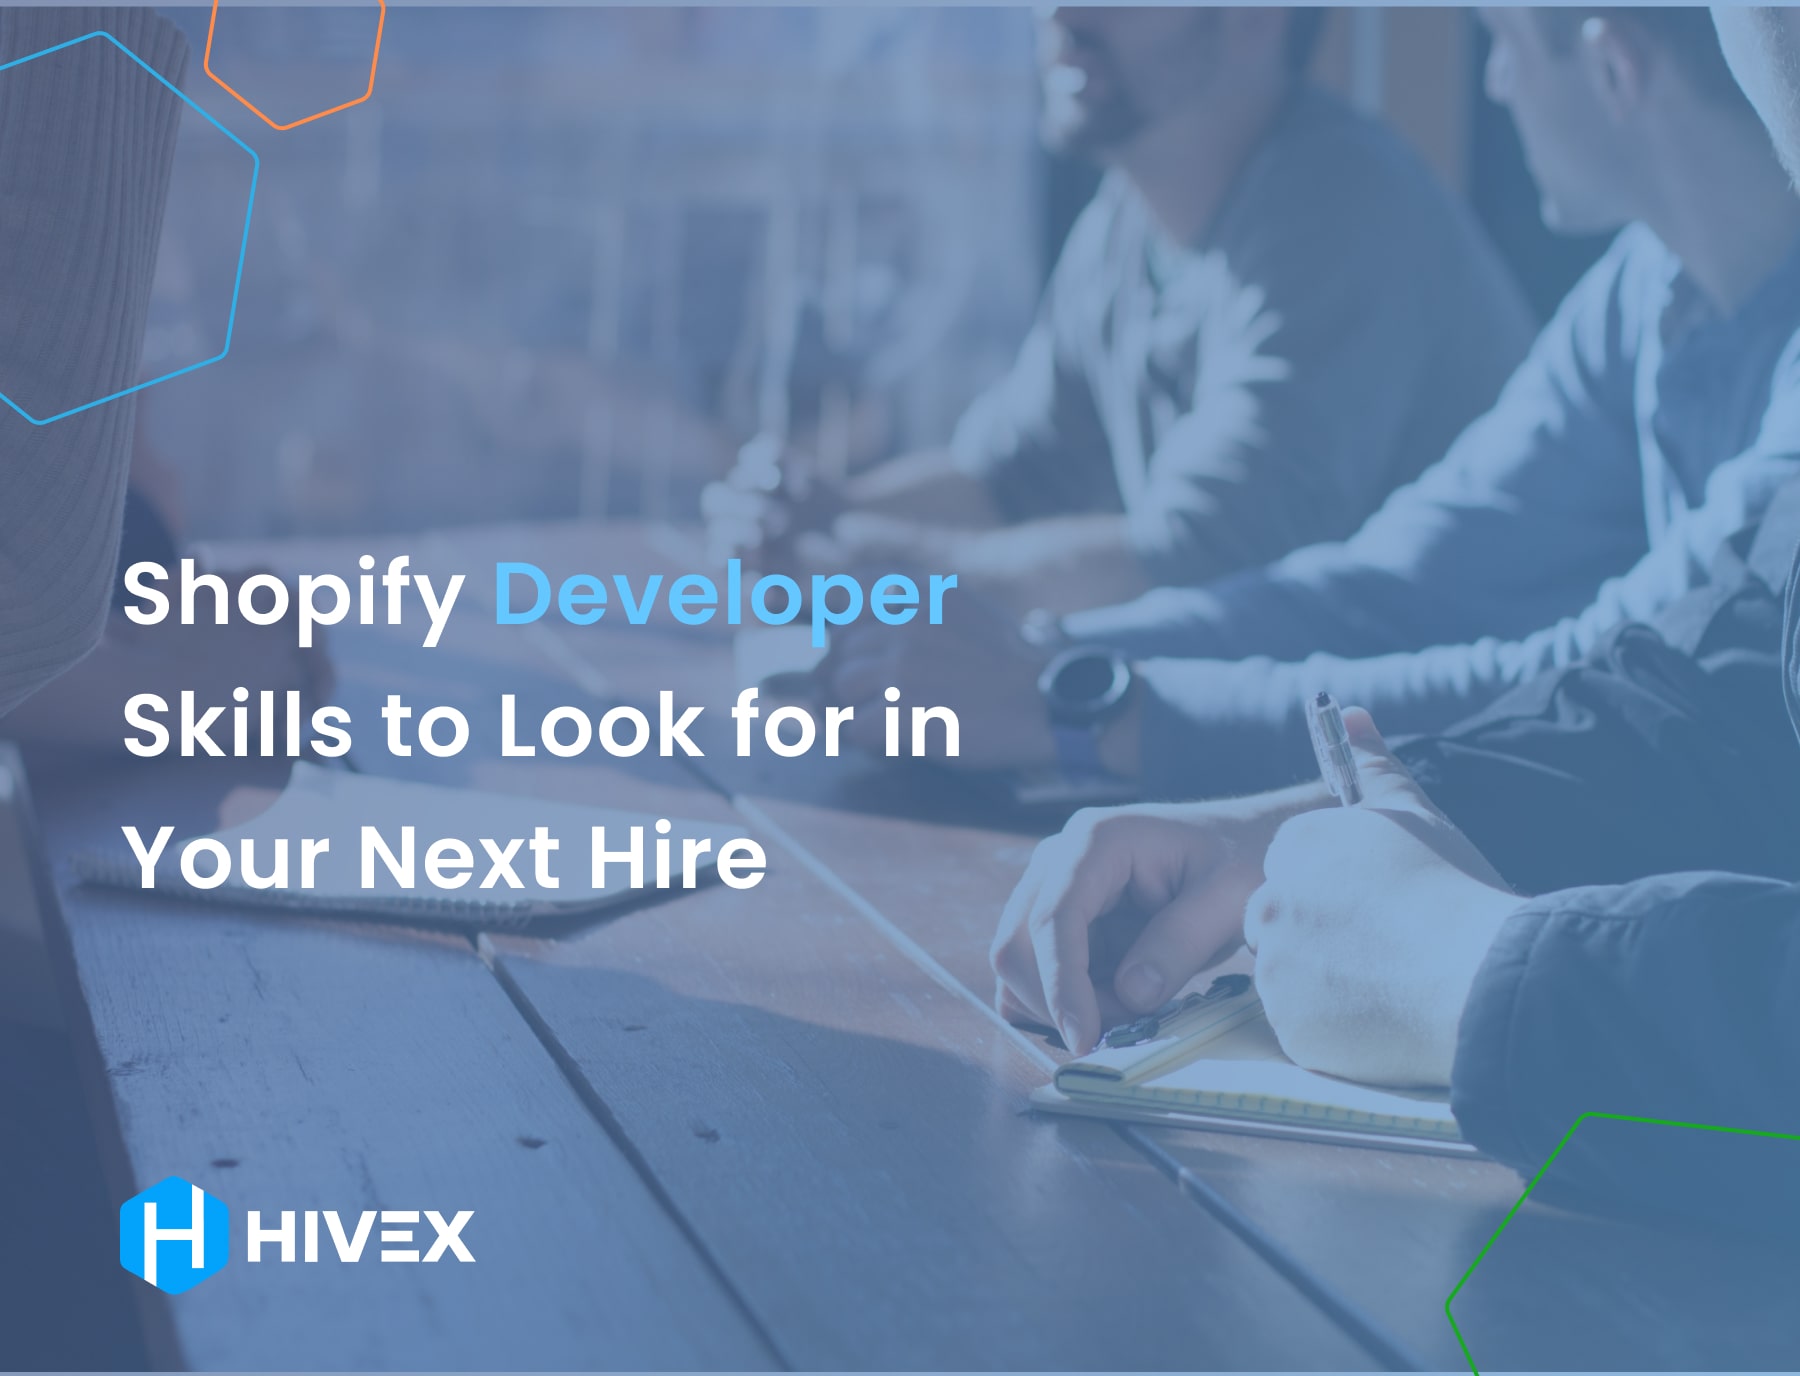 Shopify Developer Skills to Look For in Your Next Hire